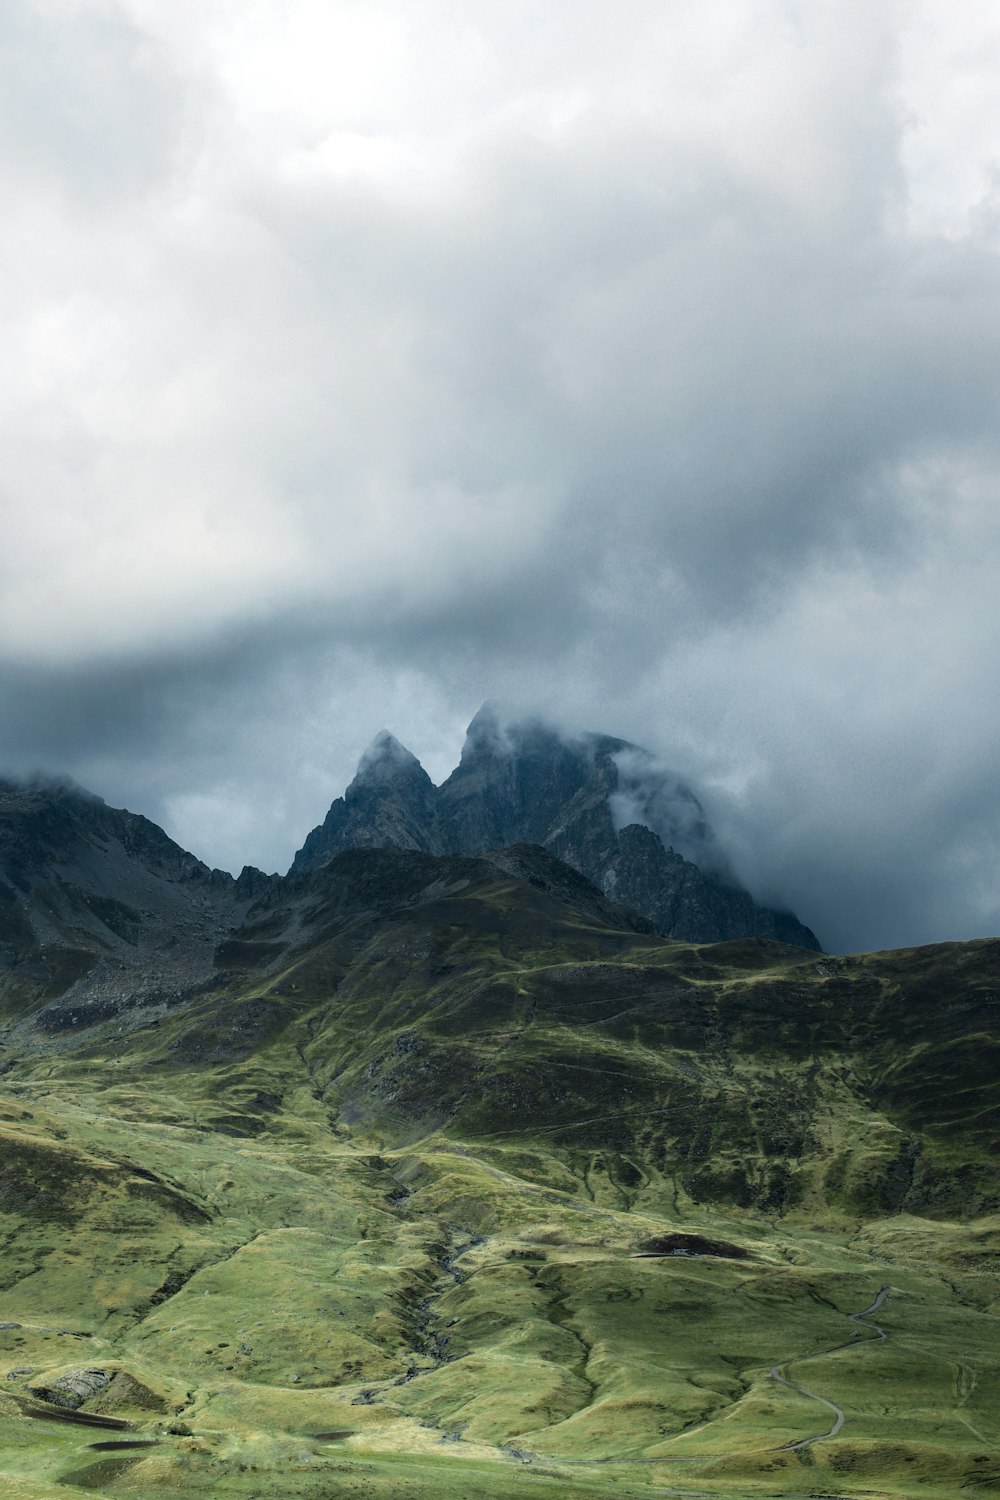 a mountain range covered in green grass under a cloudy sky